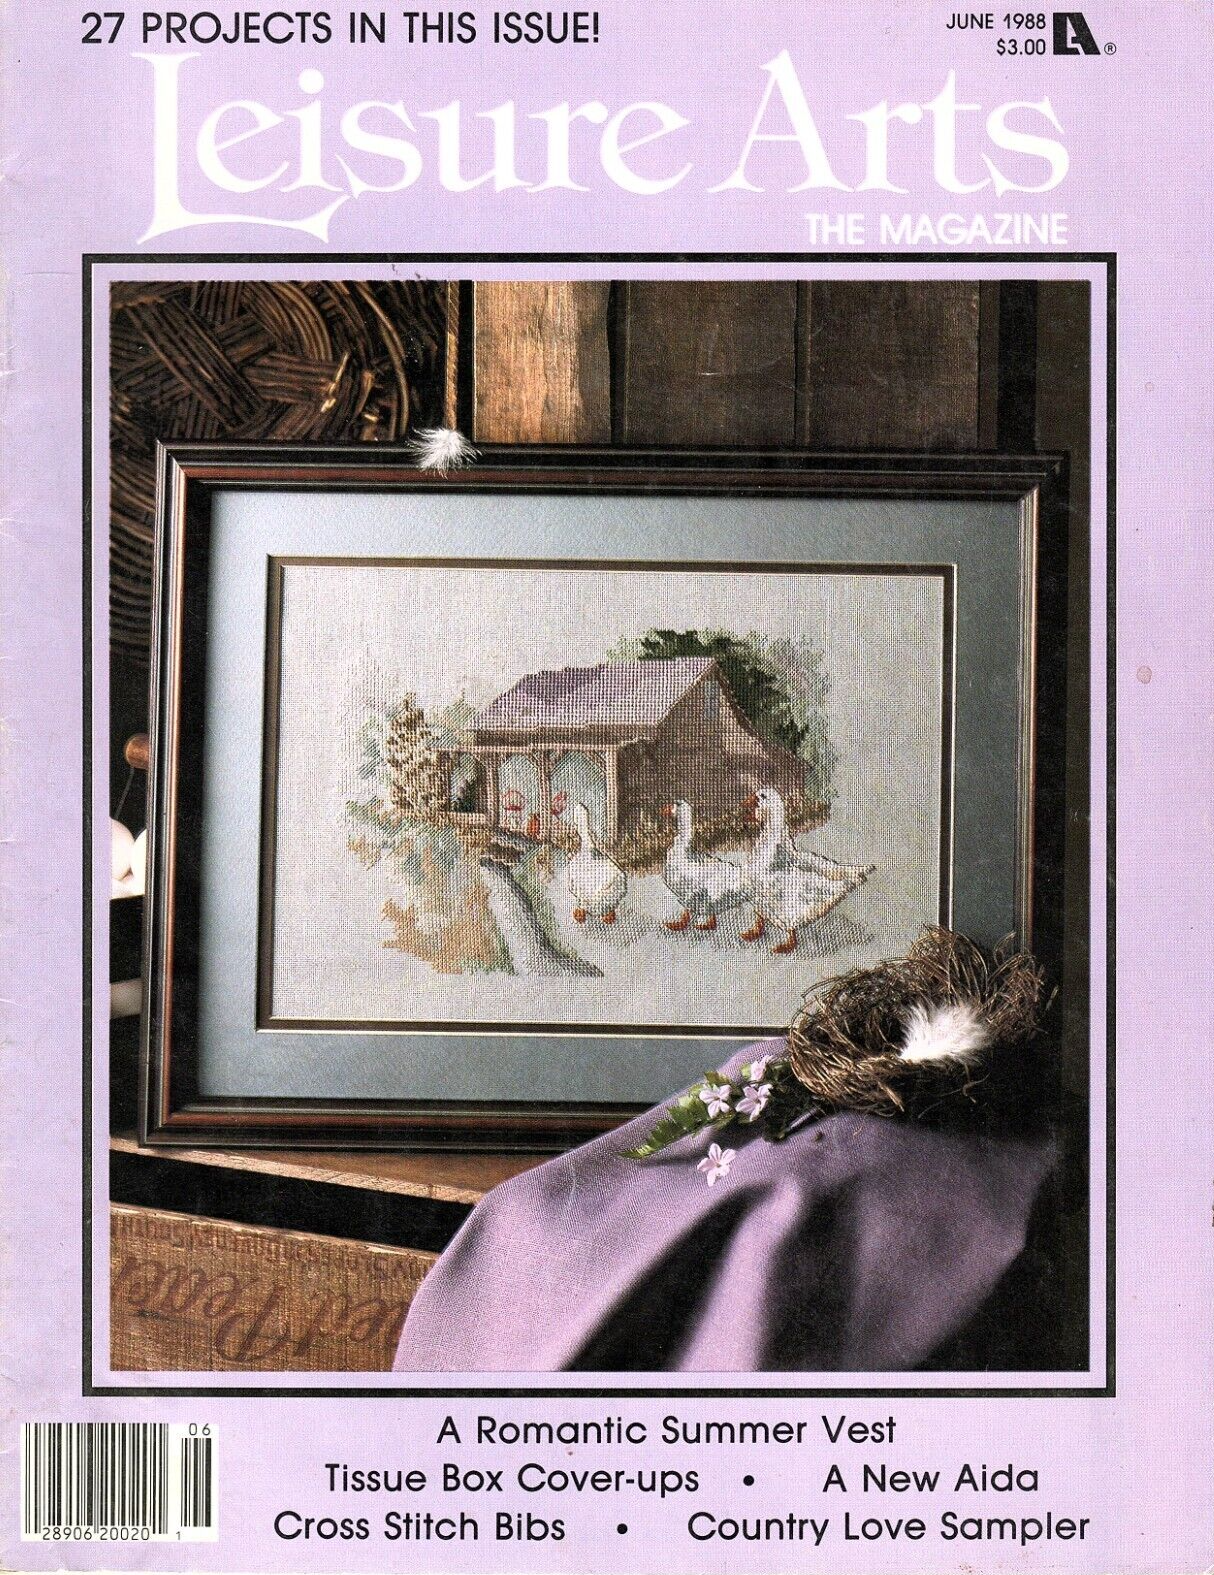 Primary image for Leisure Arts The Magazine June 1988 Cross Stitch, Knit, Crochet Patterns